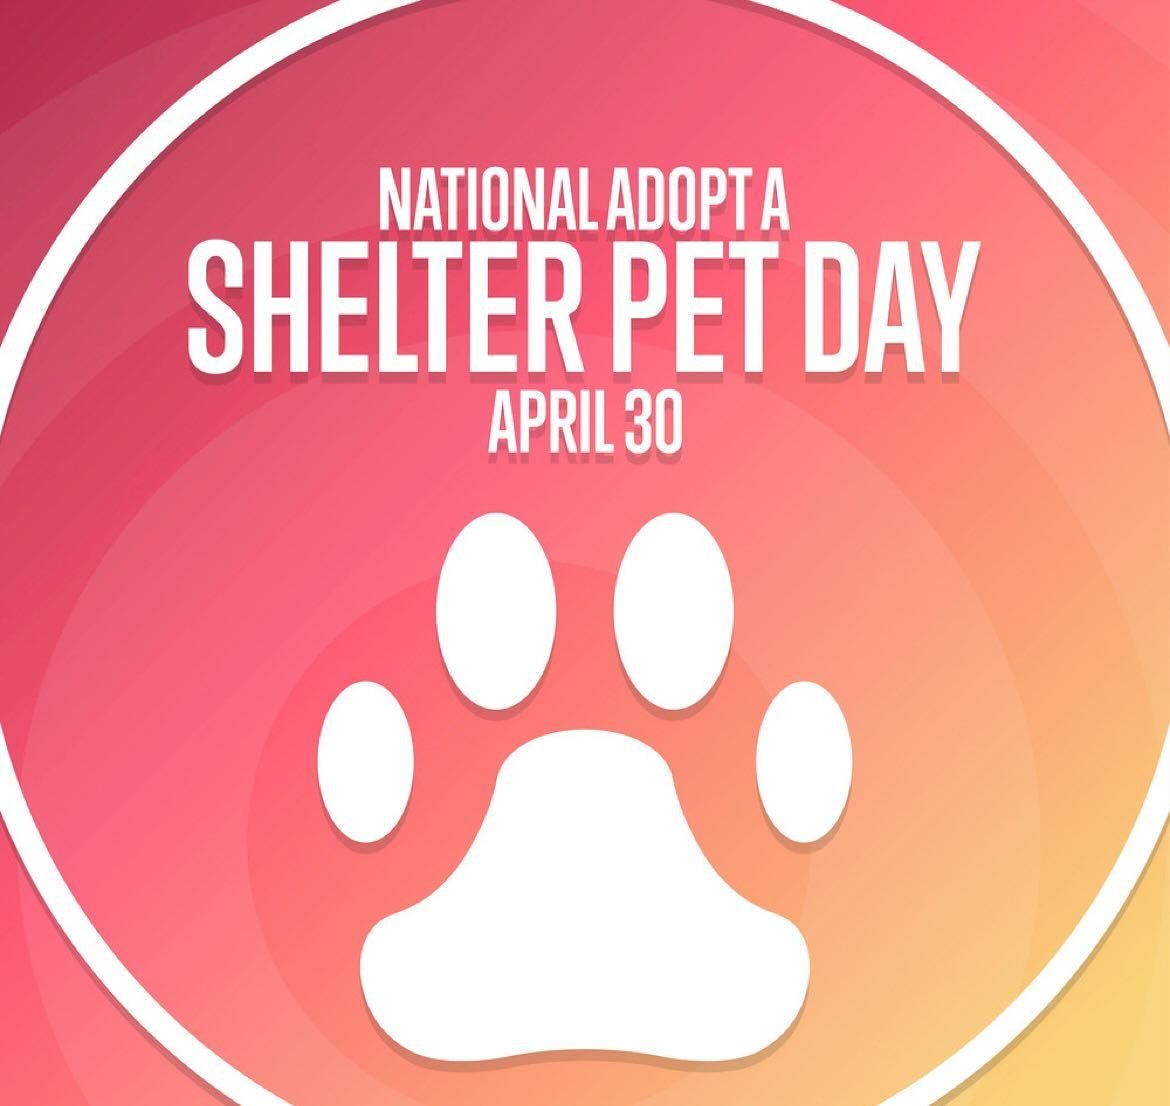 National Adopt a shelter pet day! 🐶🐱Bring your new furry family member and receive a FREE BAG OF FOOD plus 10% OFF your entire purchase TODAY!! #bonezandpawz #supportsmallbusiness #giveback #nationaladoptashelterpetday #cat #dog #newtampa #adopt #a